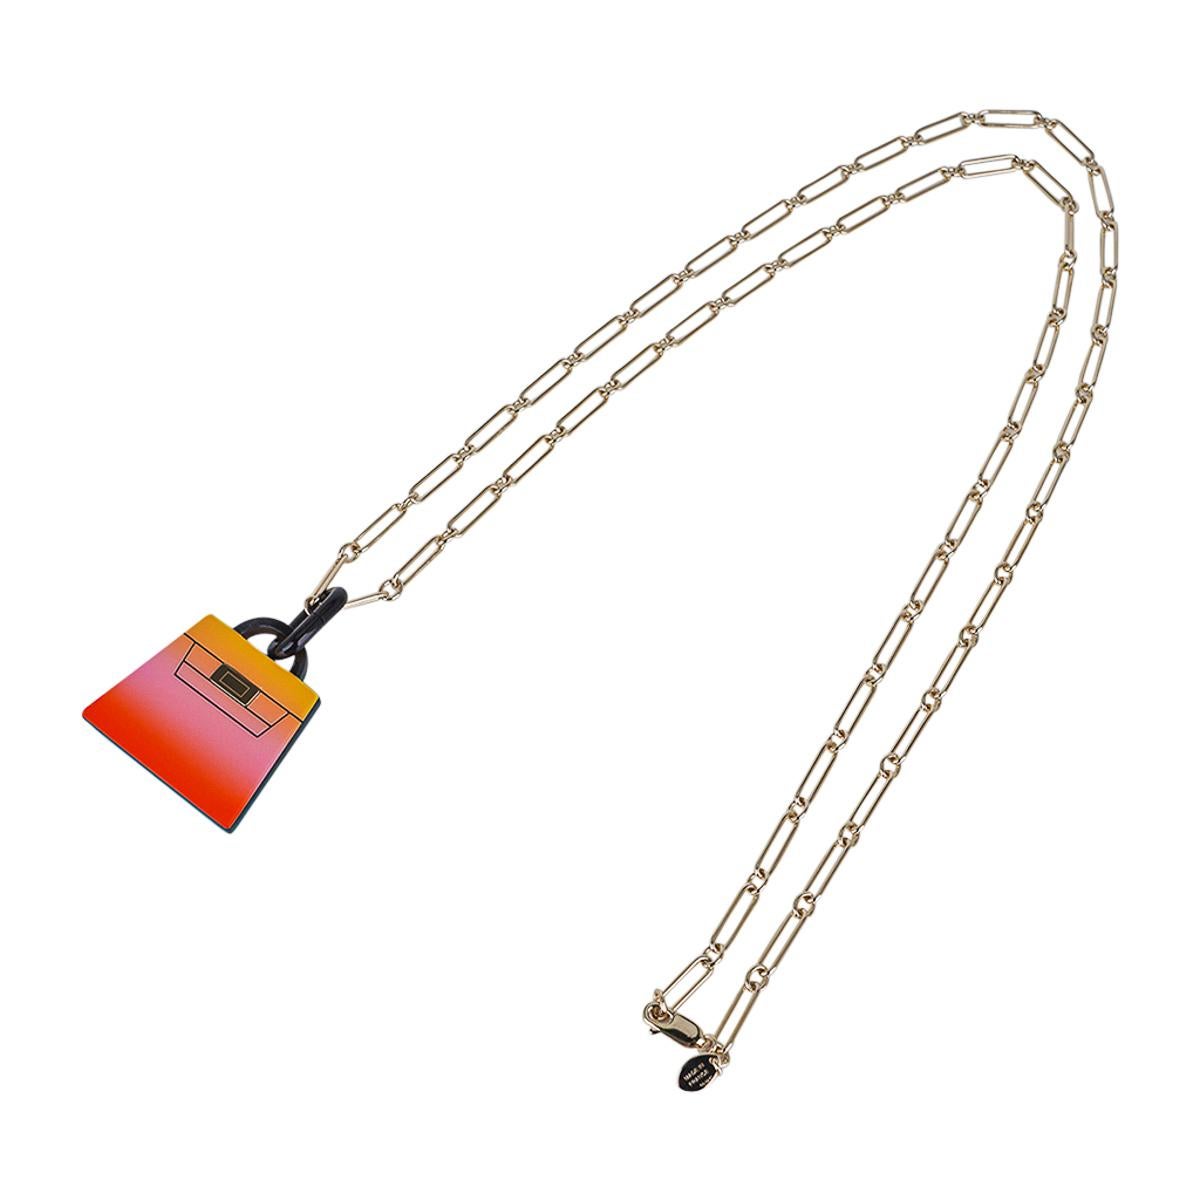 Mightychic offers an Hermes Fusion Kelly Pendant necklace featured in Acidule.
Beautifully lacquered in hues of blue to beach sand.
This special lacquer technique is accentuated with a Permabrass chain link necklace.
Beautiful and unmistakably